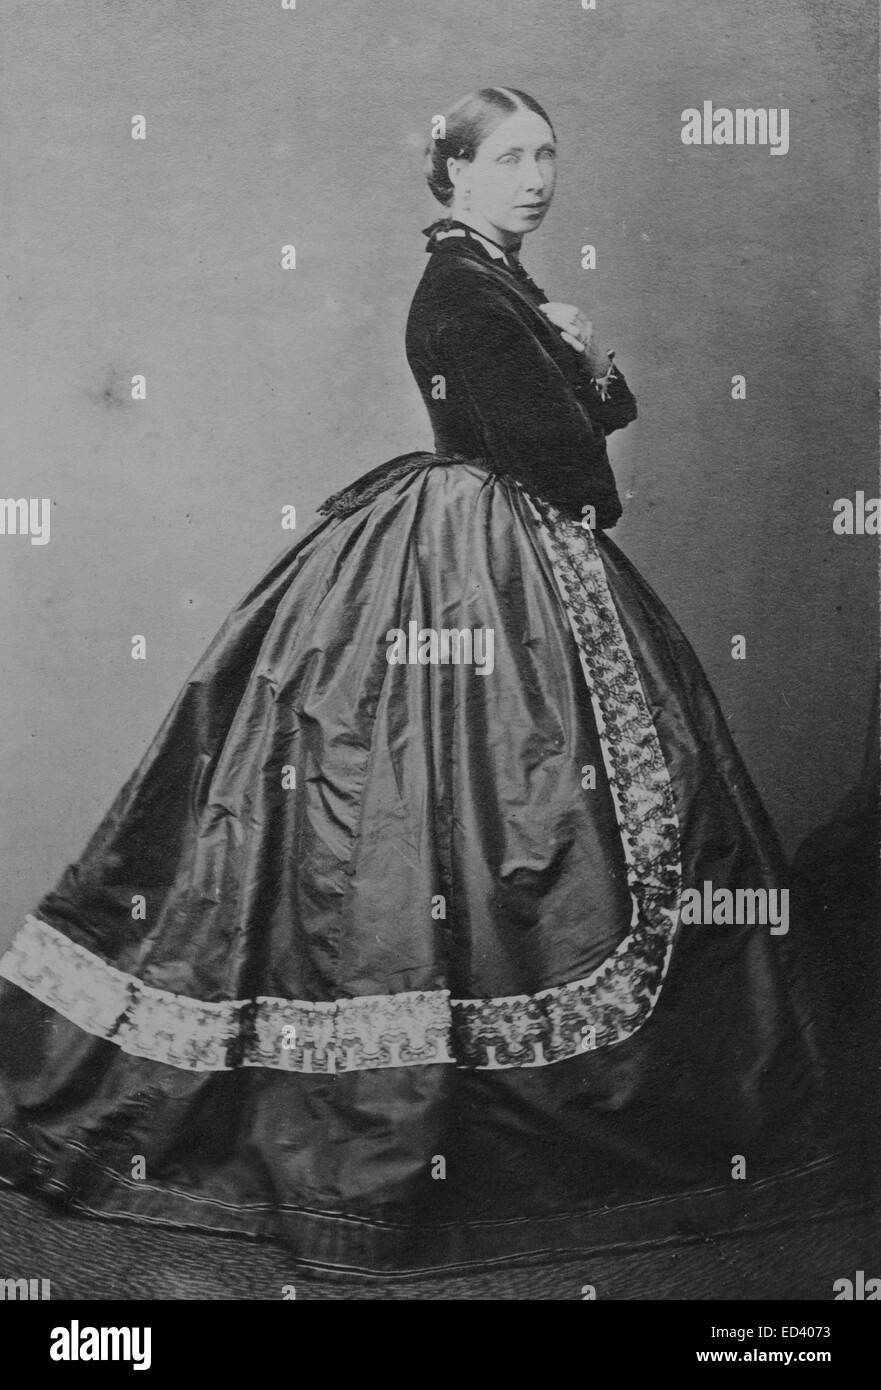 Victorian lady wearing a bustle style dress Stock Photo